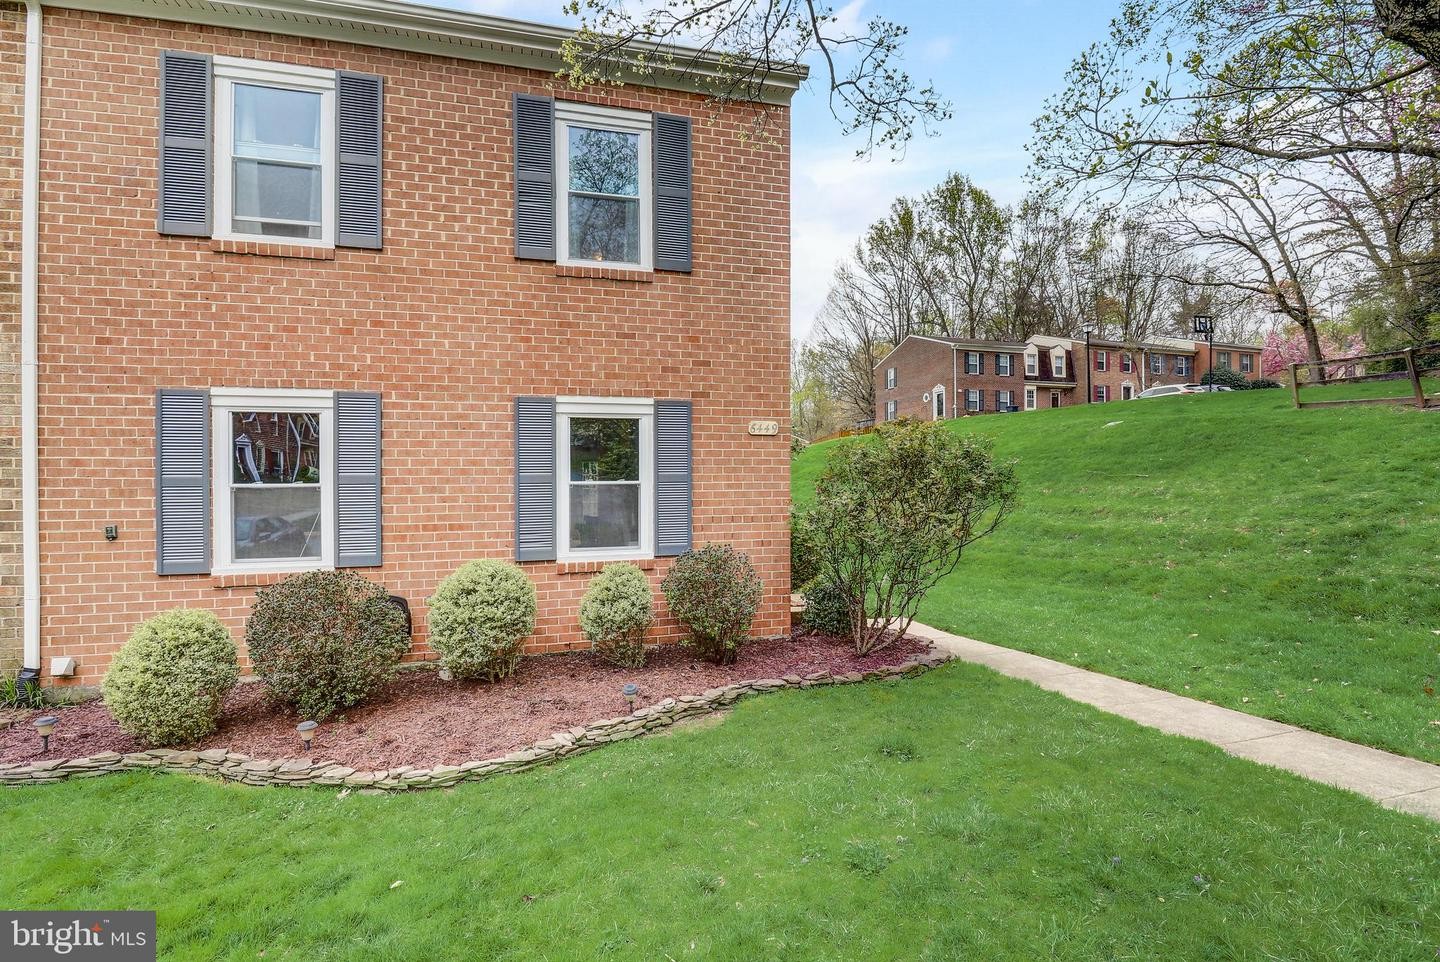 2. 6449 Shannon Station Ct